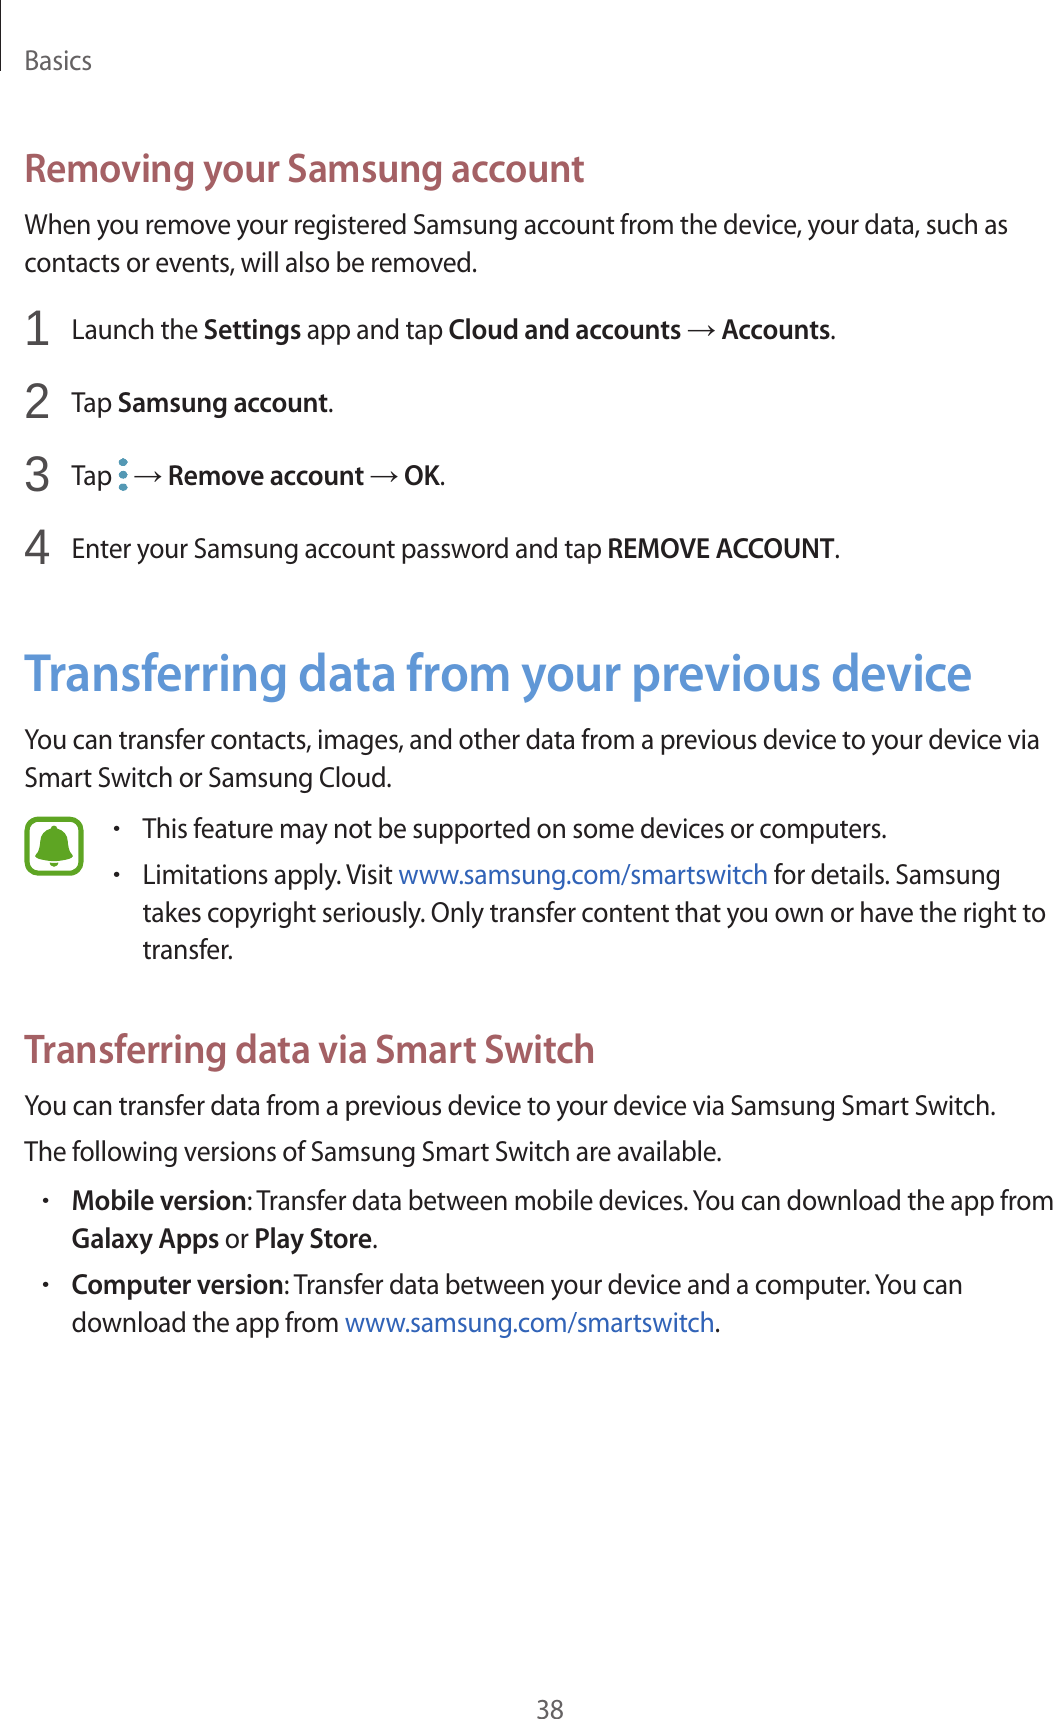 Basics38Removing your Samsung accountWhen you remove your registered Samsung account from the device, your data, such as contacts or events, will also be removed.1  Launch the Settings app and tap Cloud and accounts → Accounts.2  Tap Samsung account.3  Tap   → Remove account → OK.4  Enter your Samsung account password and tap REMOVE ACCOUNT.Transferring data from your previous deviceYou can transfer contacts, images, and other data from a previous device to your device via Smart Switch or Samsung Cloud.•This feature may not be supported on some devices or computers.•Limitations apply. Visit www.samsung.com/smartswitch for details. Samsung takes copyright seriously. Only transfer content that you own or have the right to transfer.Transferring data via Smart SwitchYou can transfer data from a previous device to your device via Samsung Smart Switch.The following versions of Samsung Smart Switch are available.•Mobile version: Transfer data between mobile devices. You can download the app from Galaxy Apps or Play Store.•Computer version: Transfer data between your device and a computer. You can download the app from www.samsung.com/smartswitch.